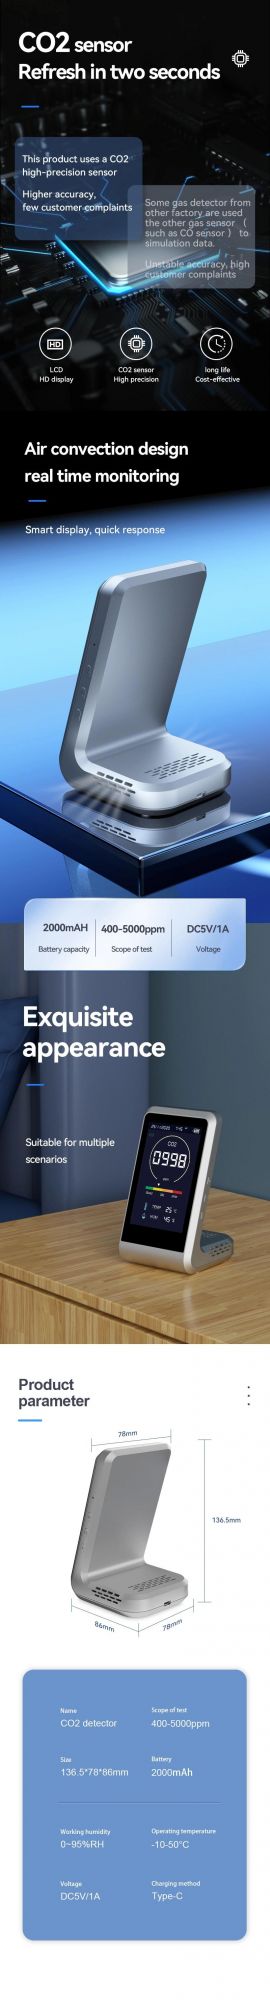 LCD Color Display High-Precision CO2 Detector, Air Temperature and Humidity Analyzer